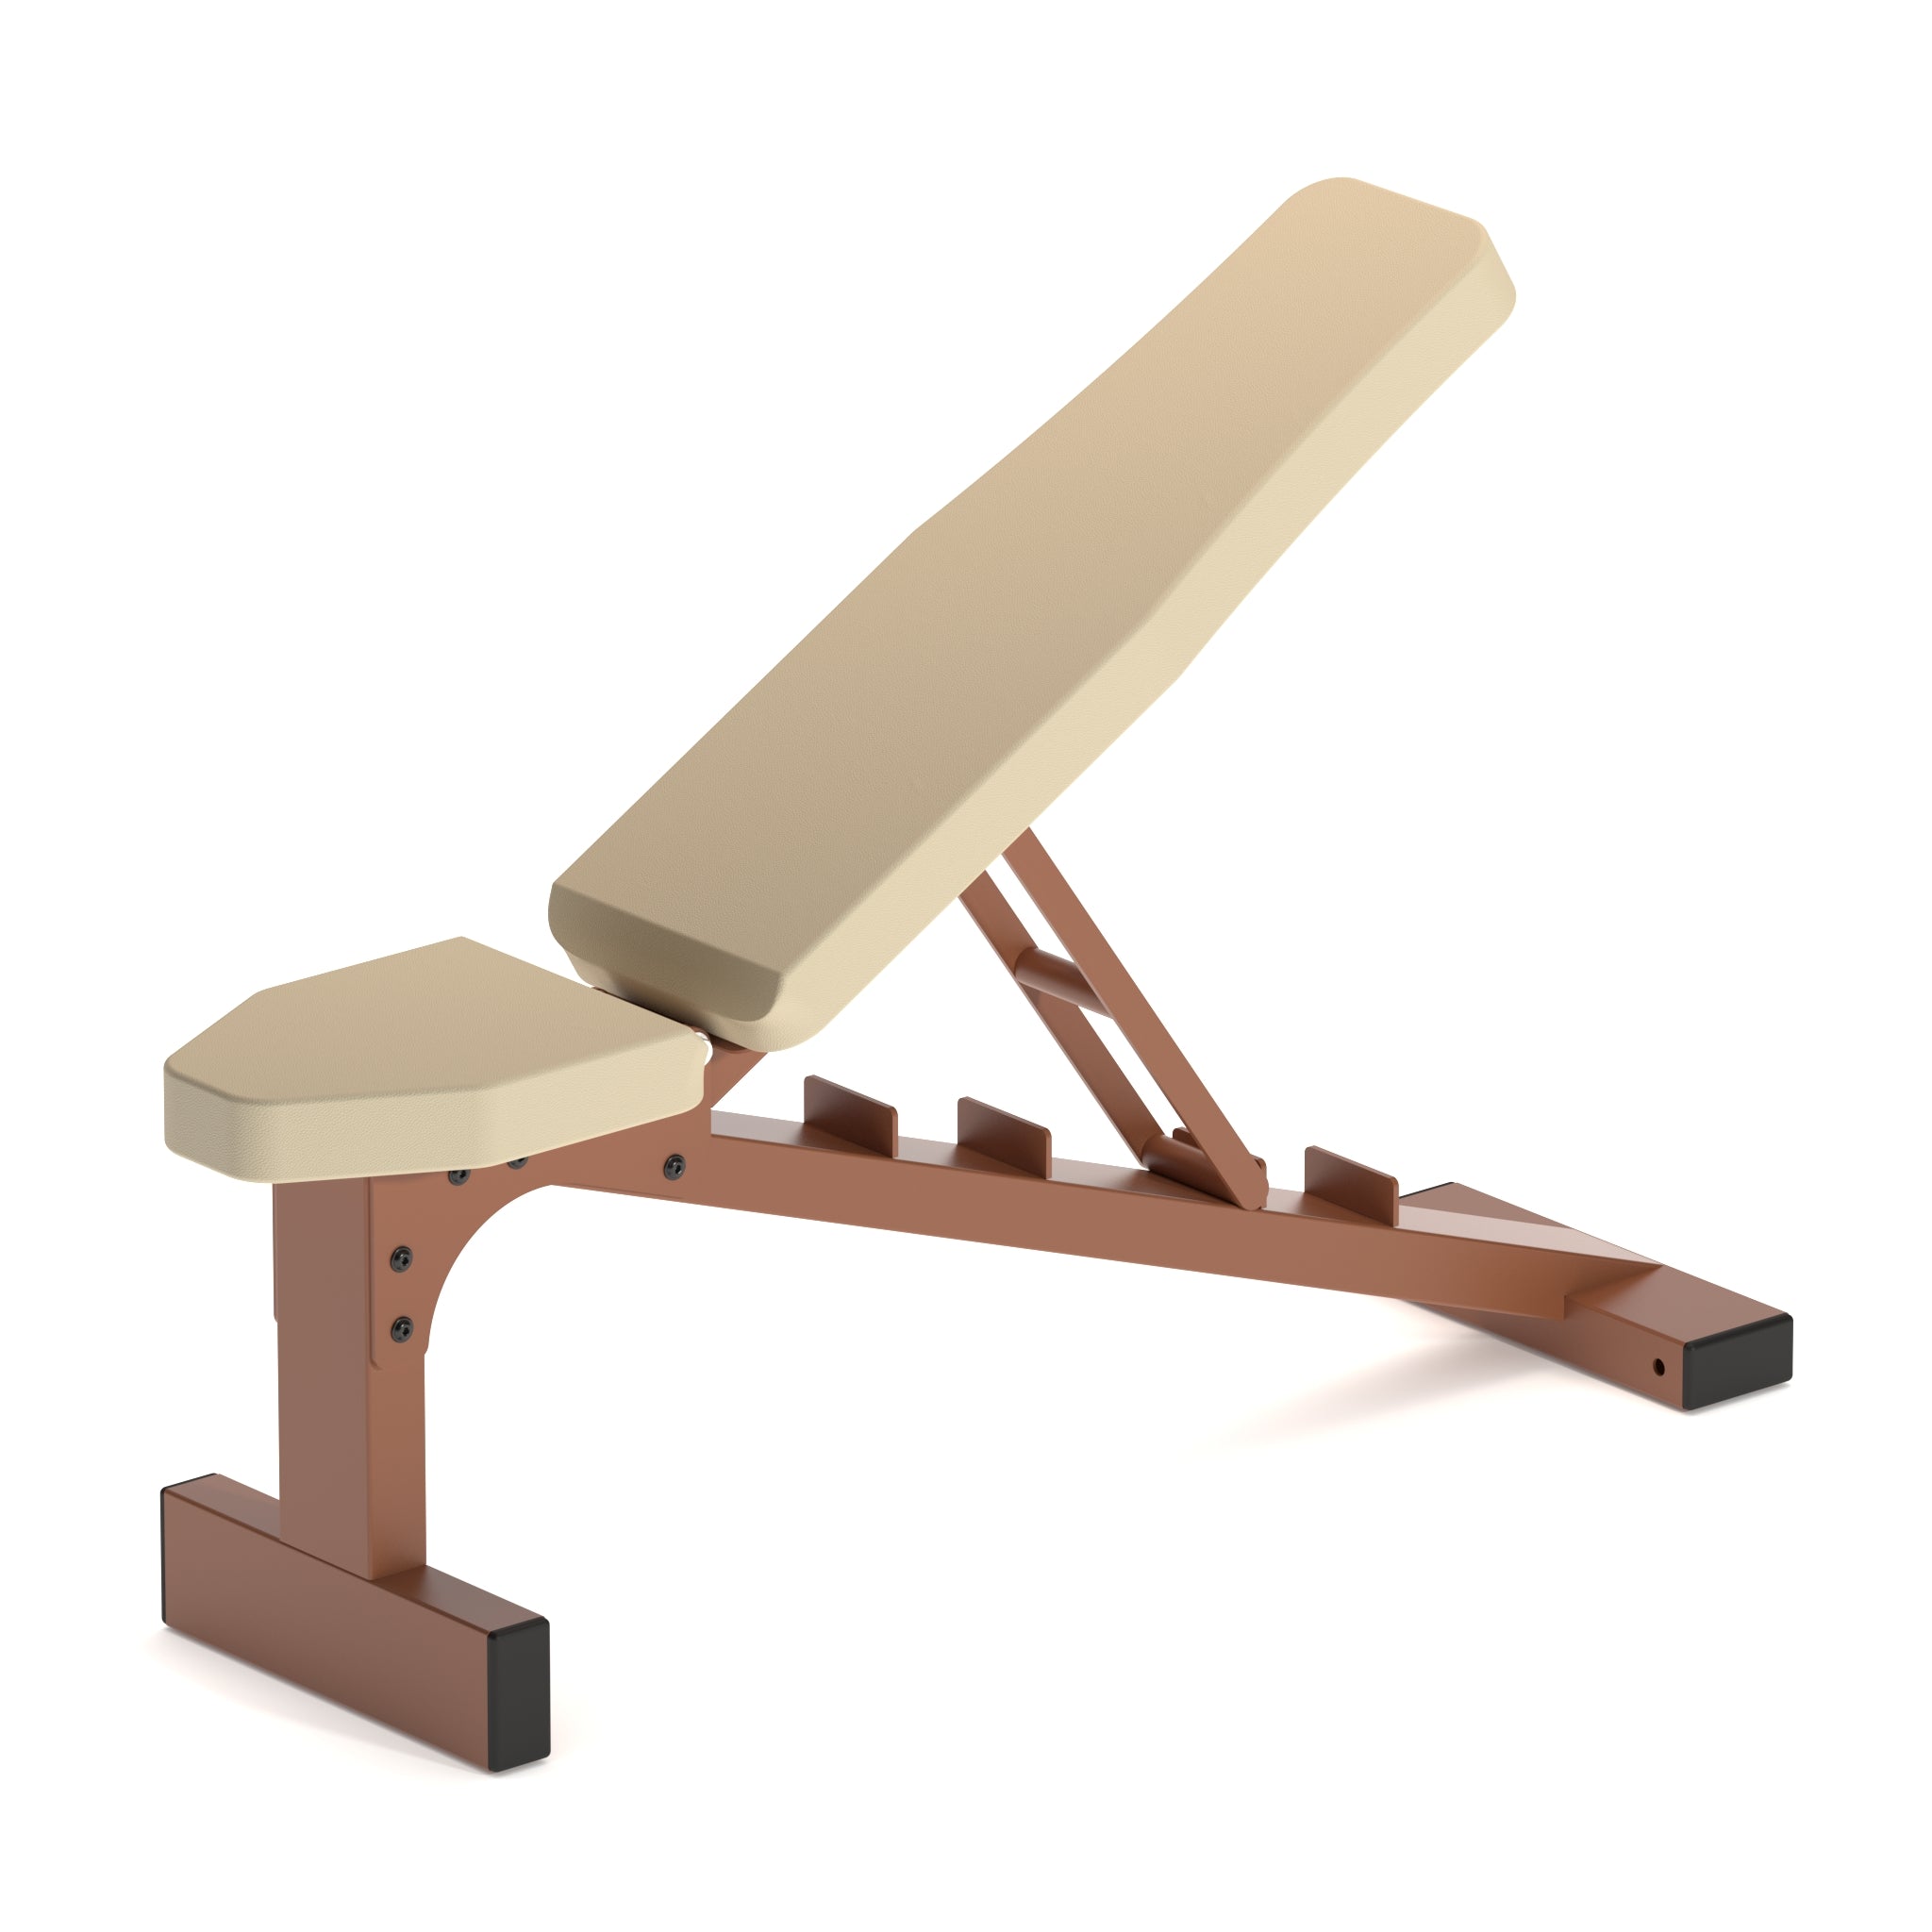 Solo Adjustable Weights Bench